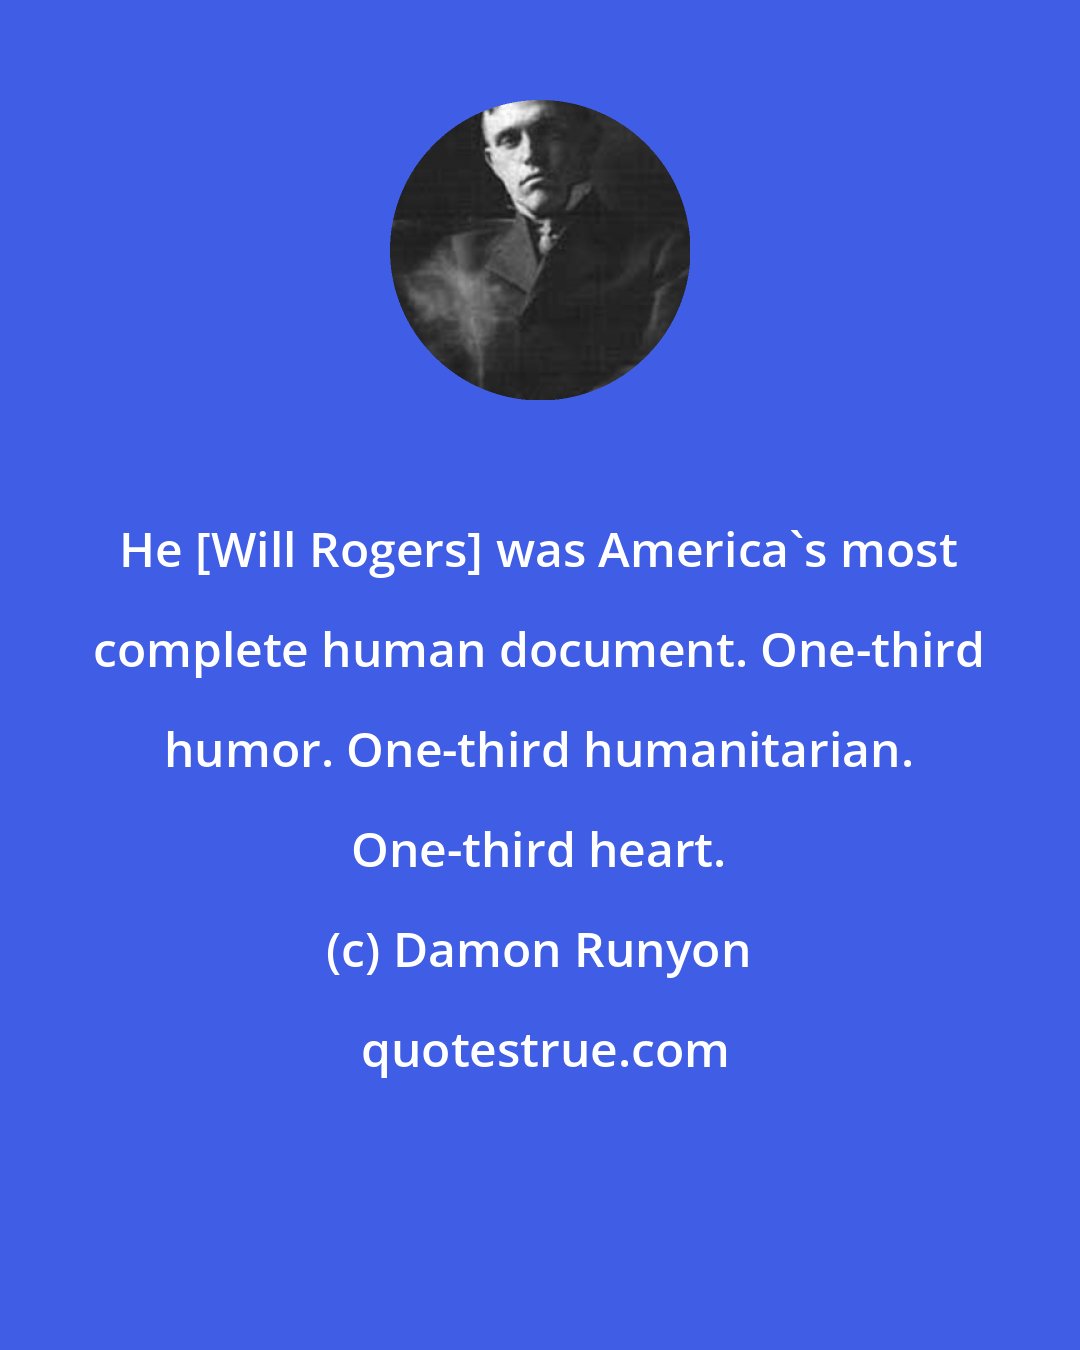 Damon Runyon: He [Will Rogers] was America's most complete human document. One-third humor. One-third humanitarian. One-third heart.